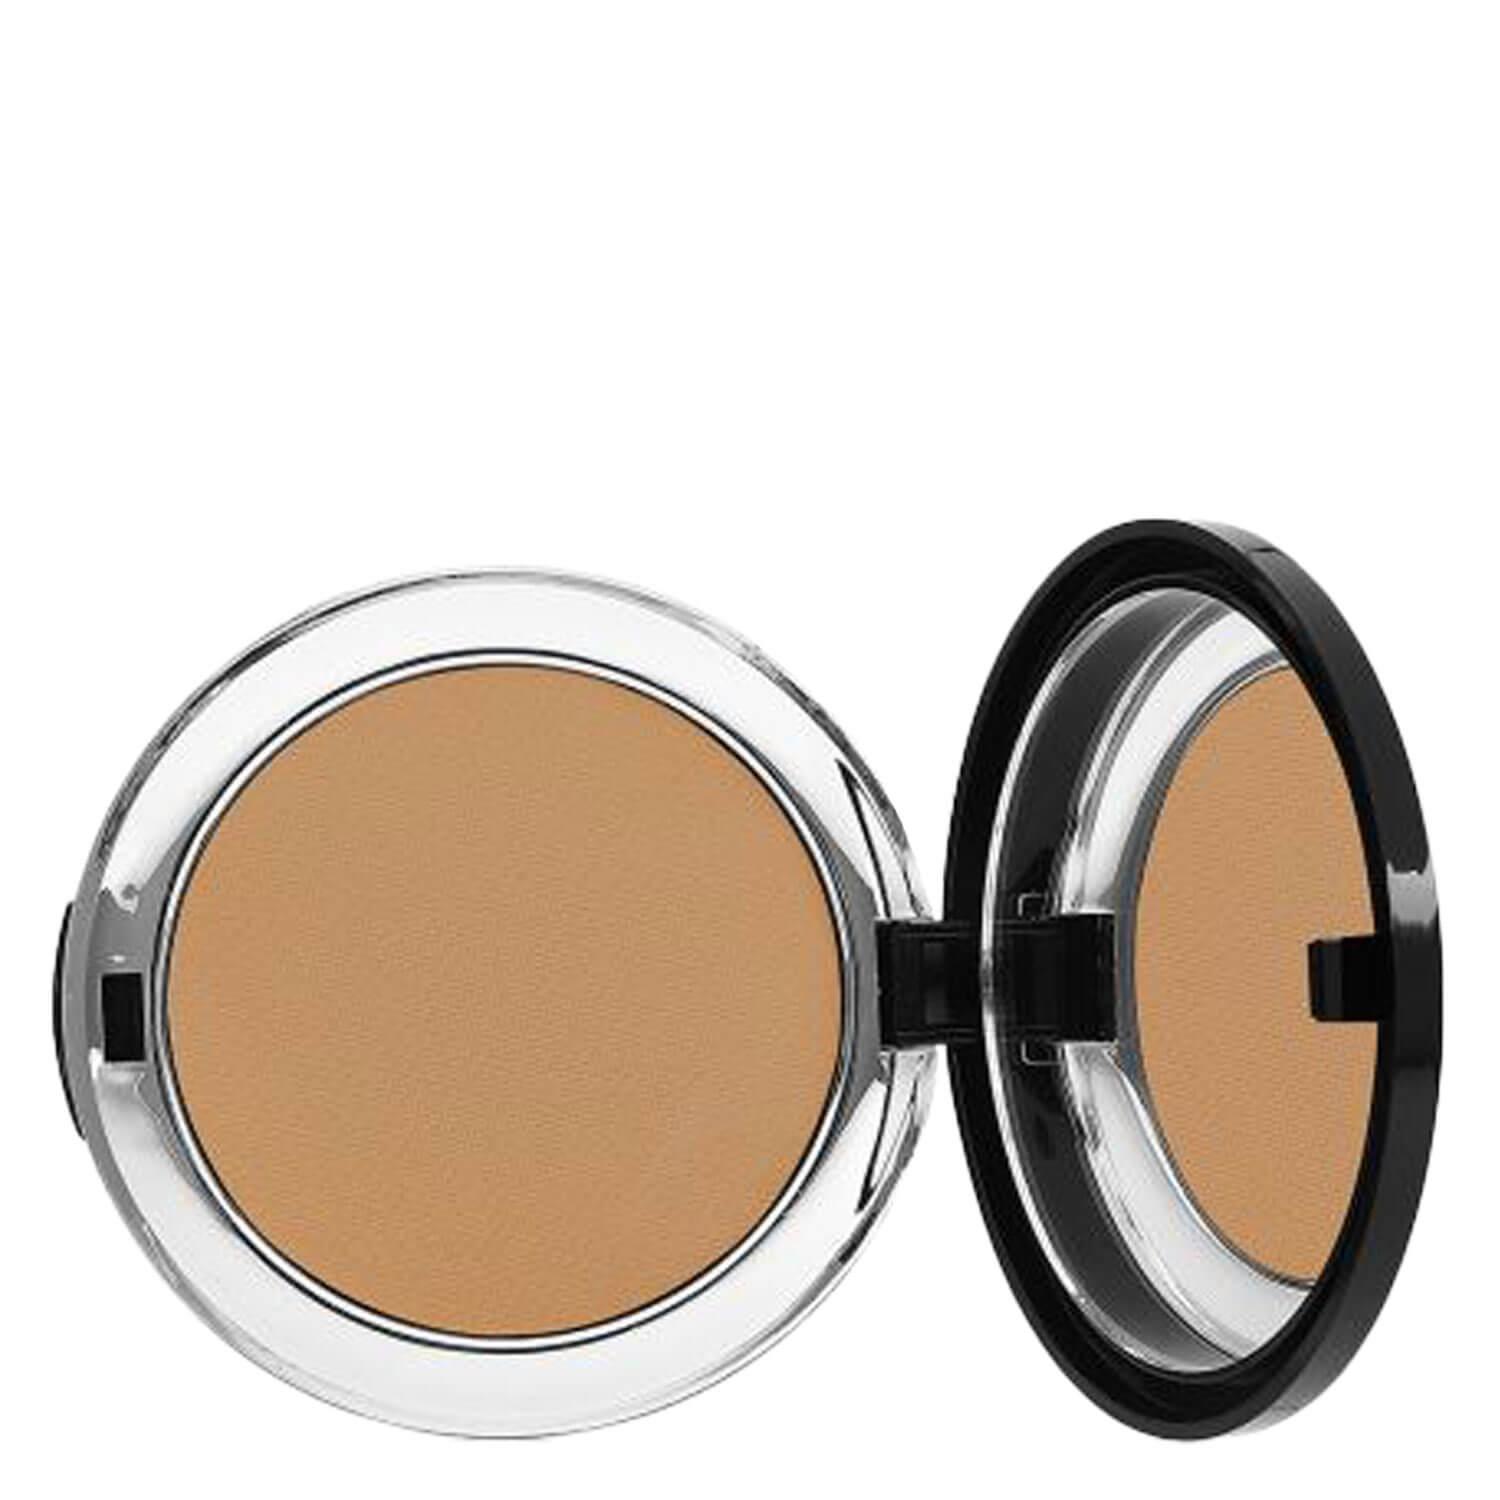 bellapierre Teint - Compact Mineral Foundation SPF15 Cafe